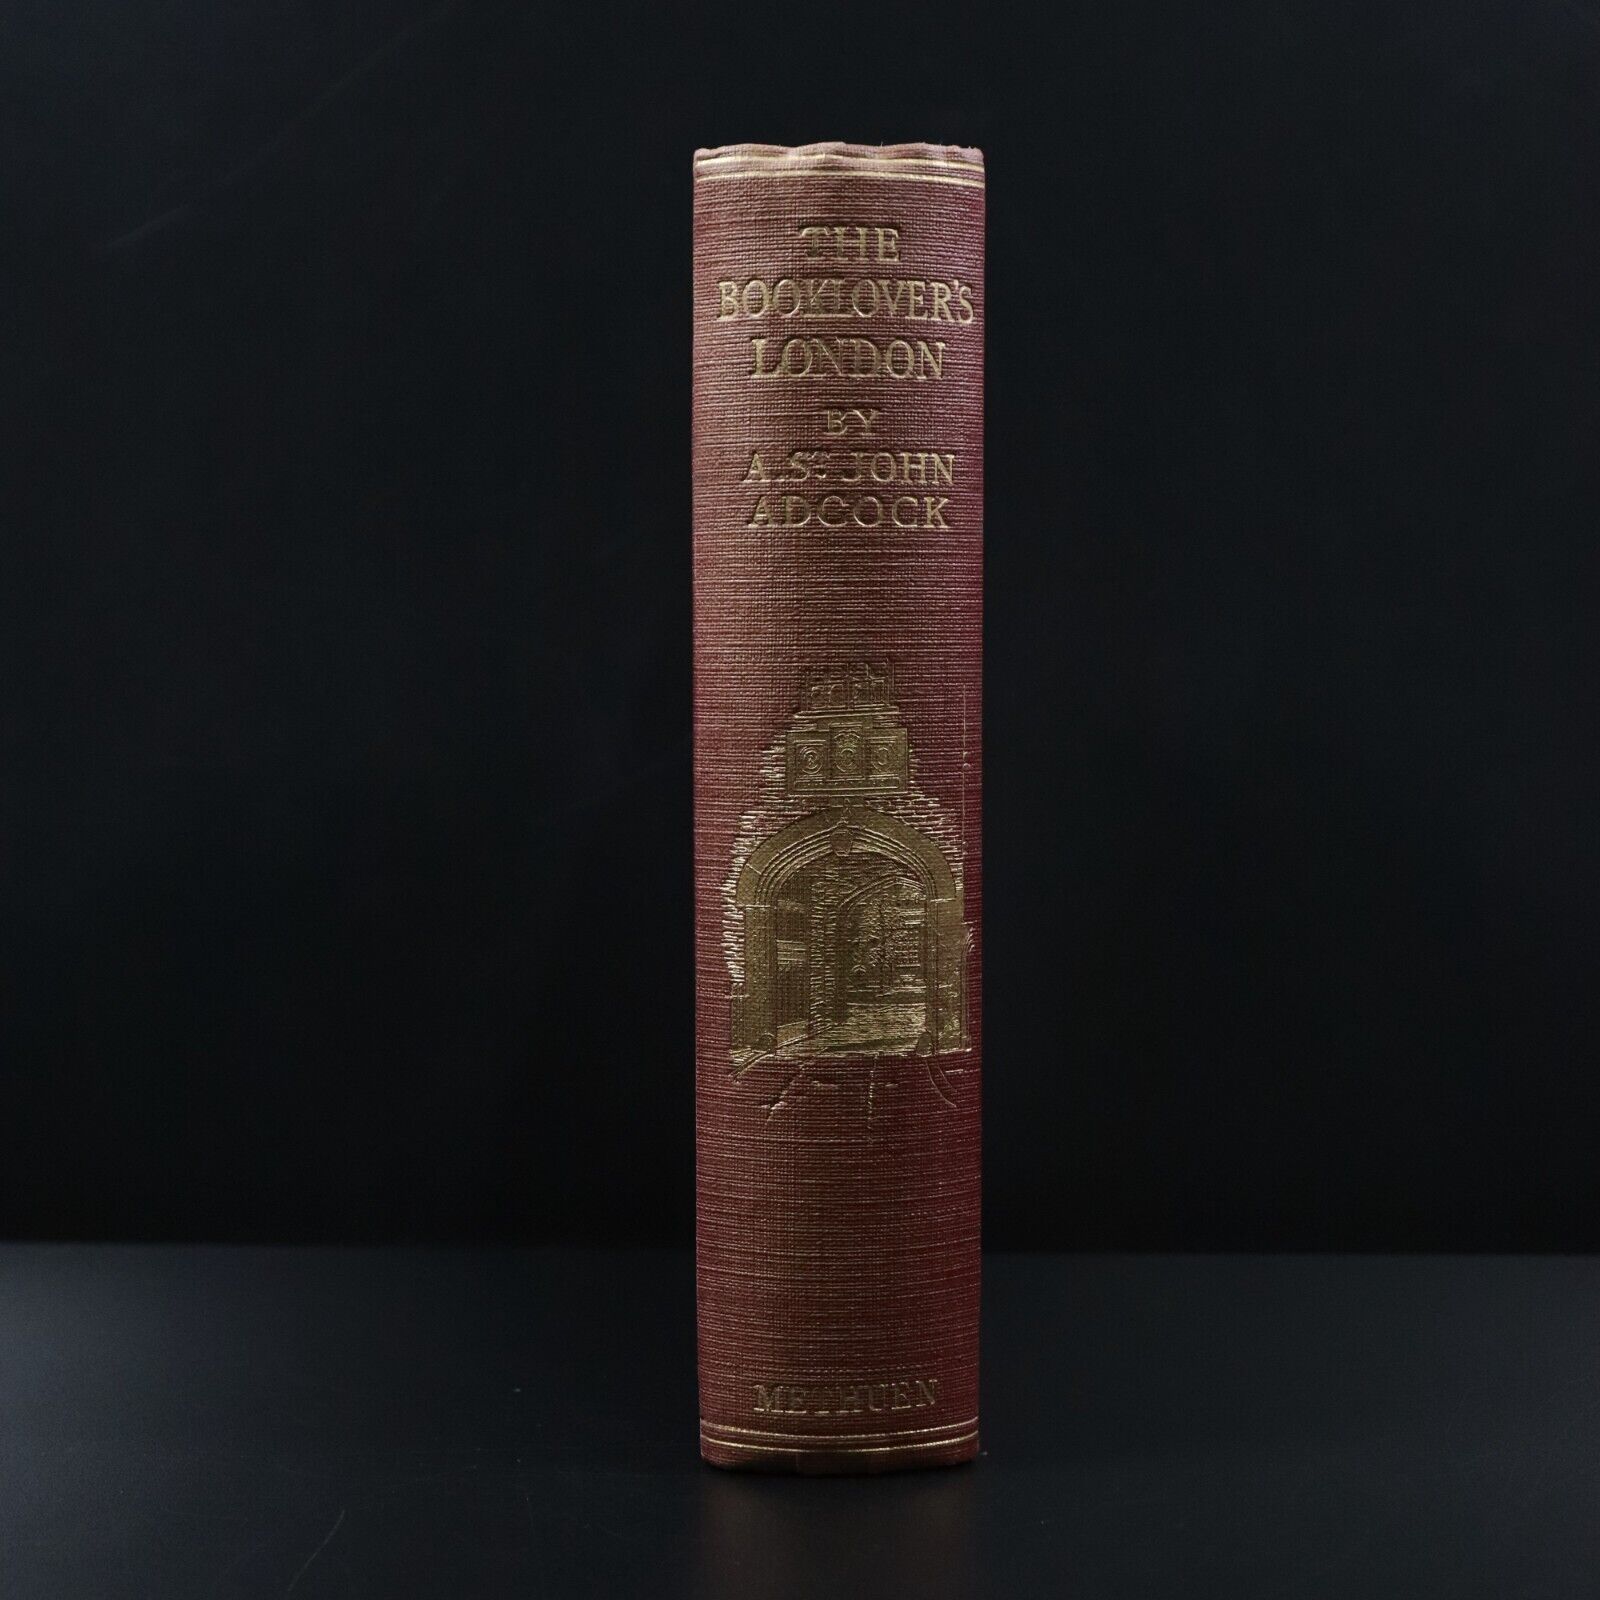 1913 The Booklovers London by A. St John Adcock Antique British History Book